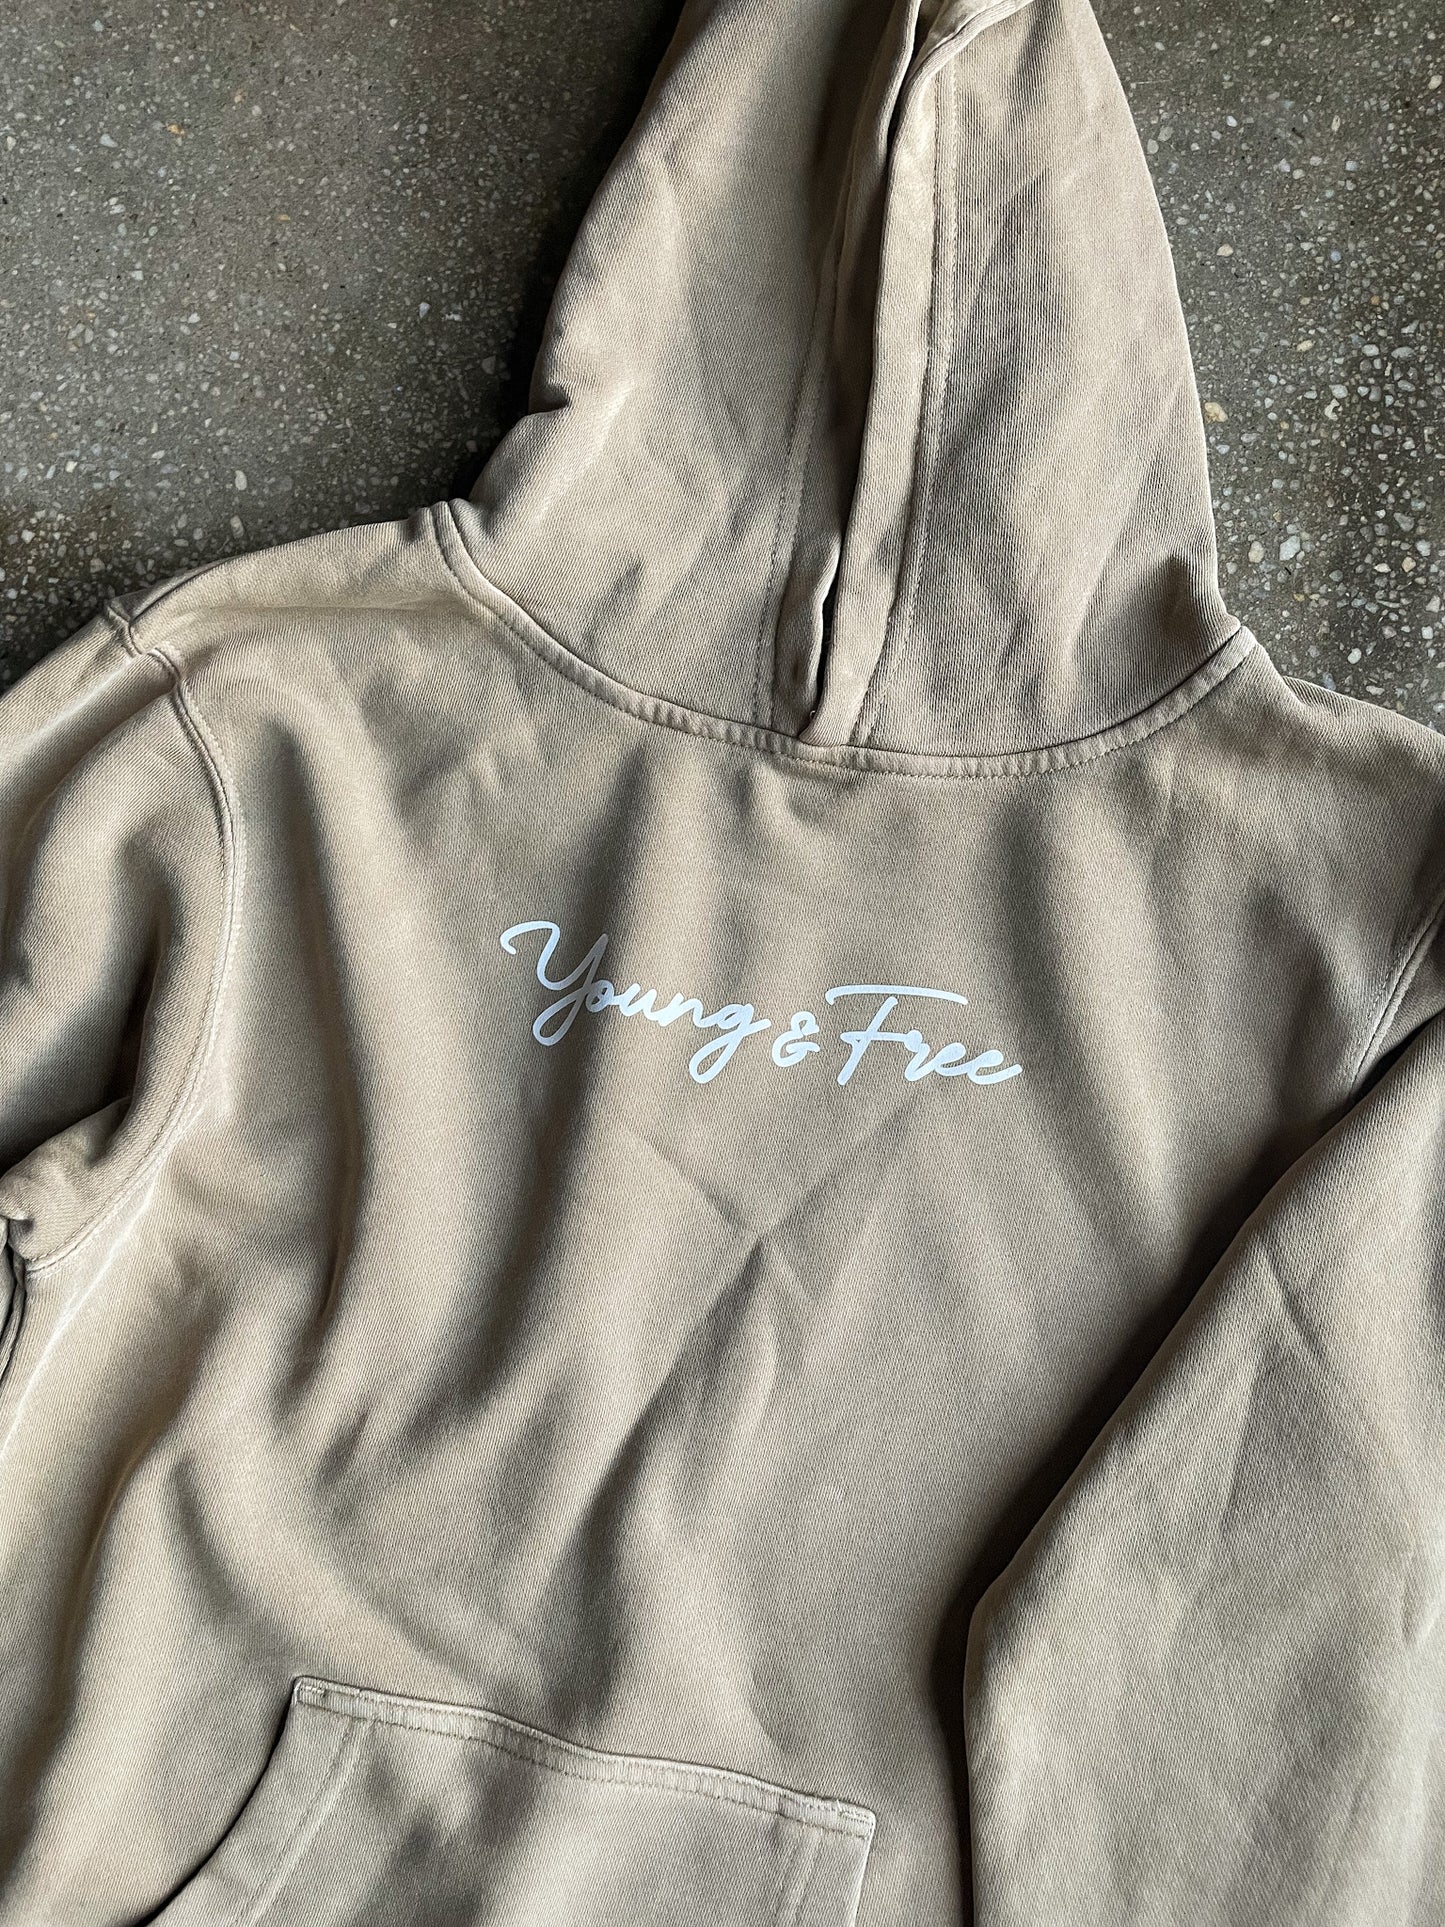 Young & Free Kids Hoodie